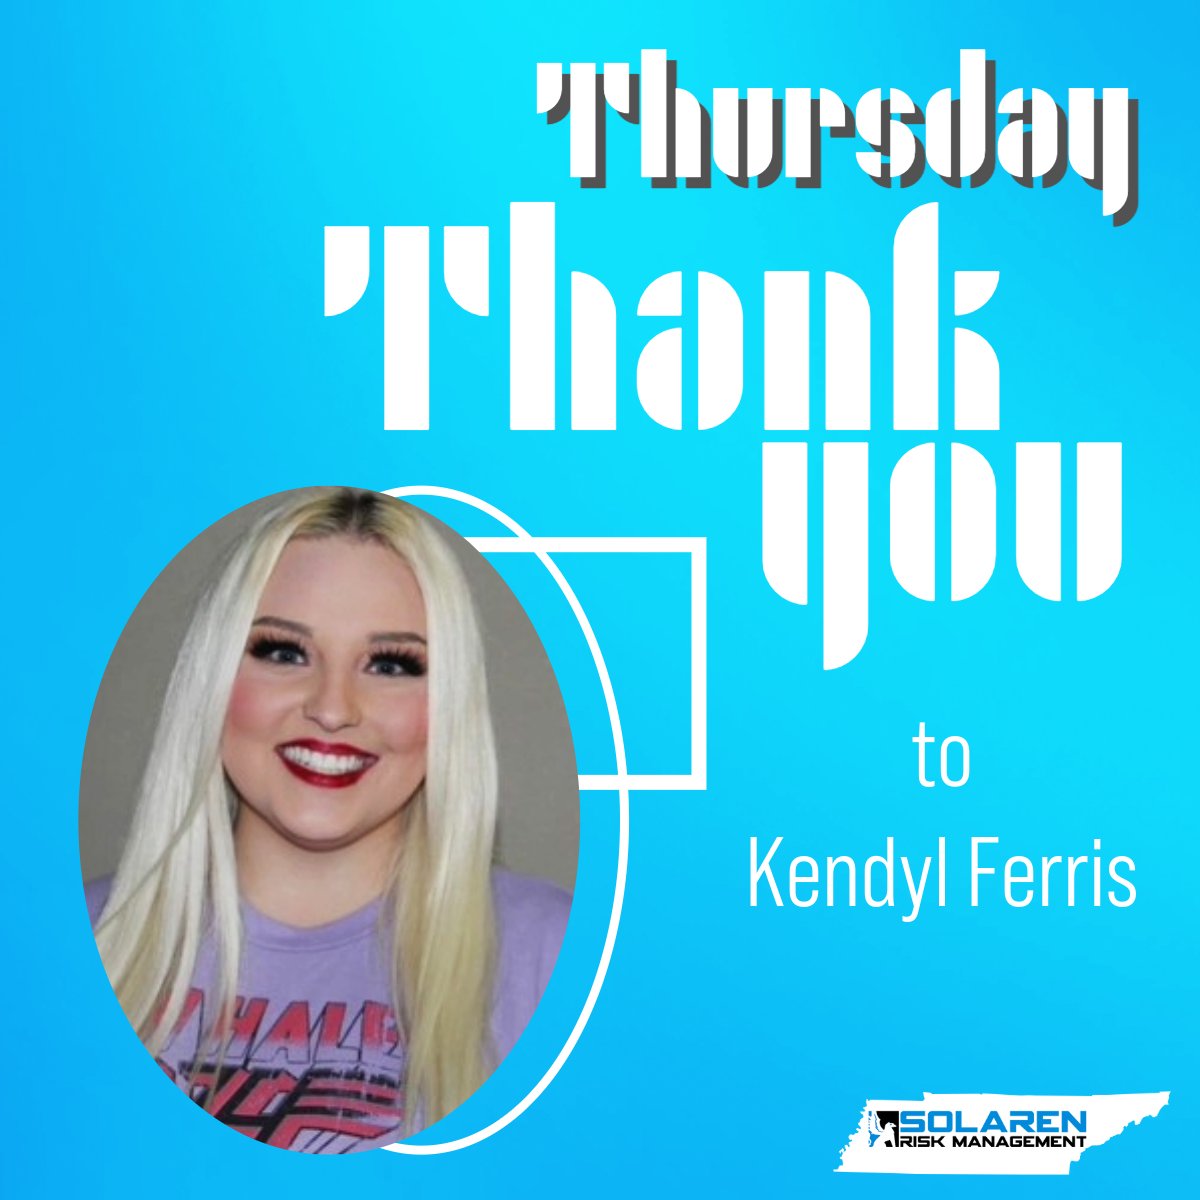 Welcome back to another #ThursdayThankYou with Solaren! Today we are highlighting the efforts of one of our Traffic Flaggers, Kendyl Ferris.